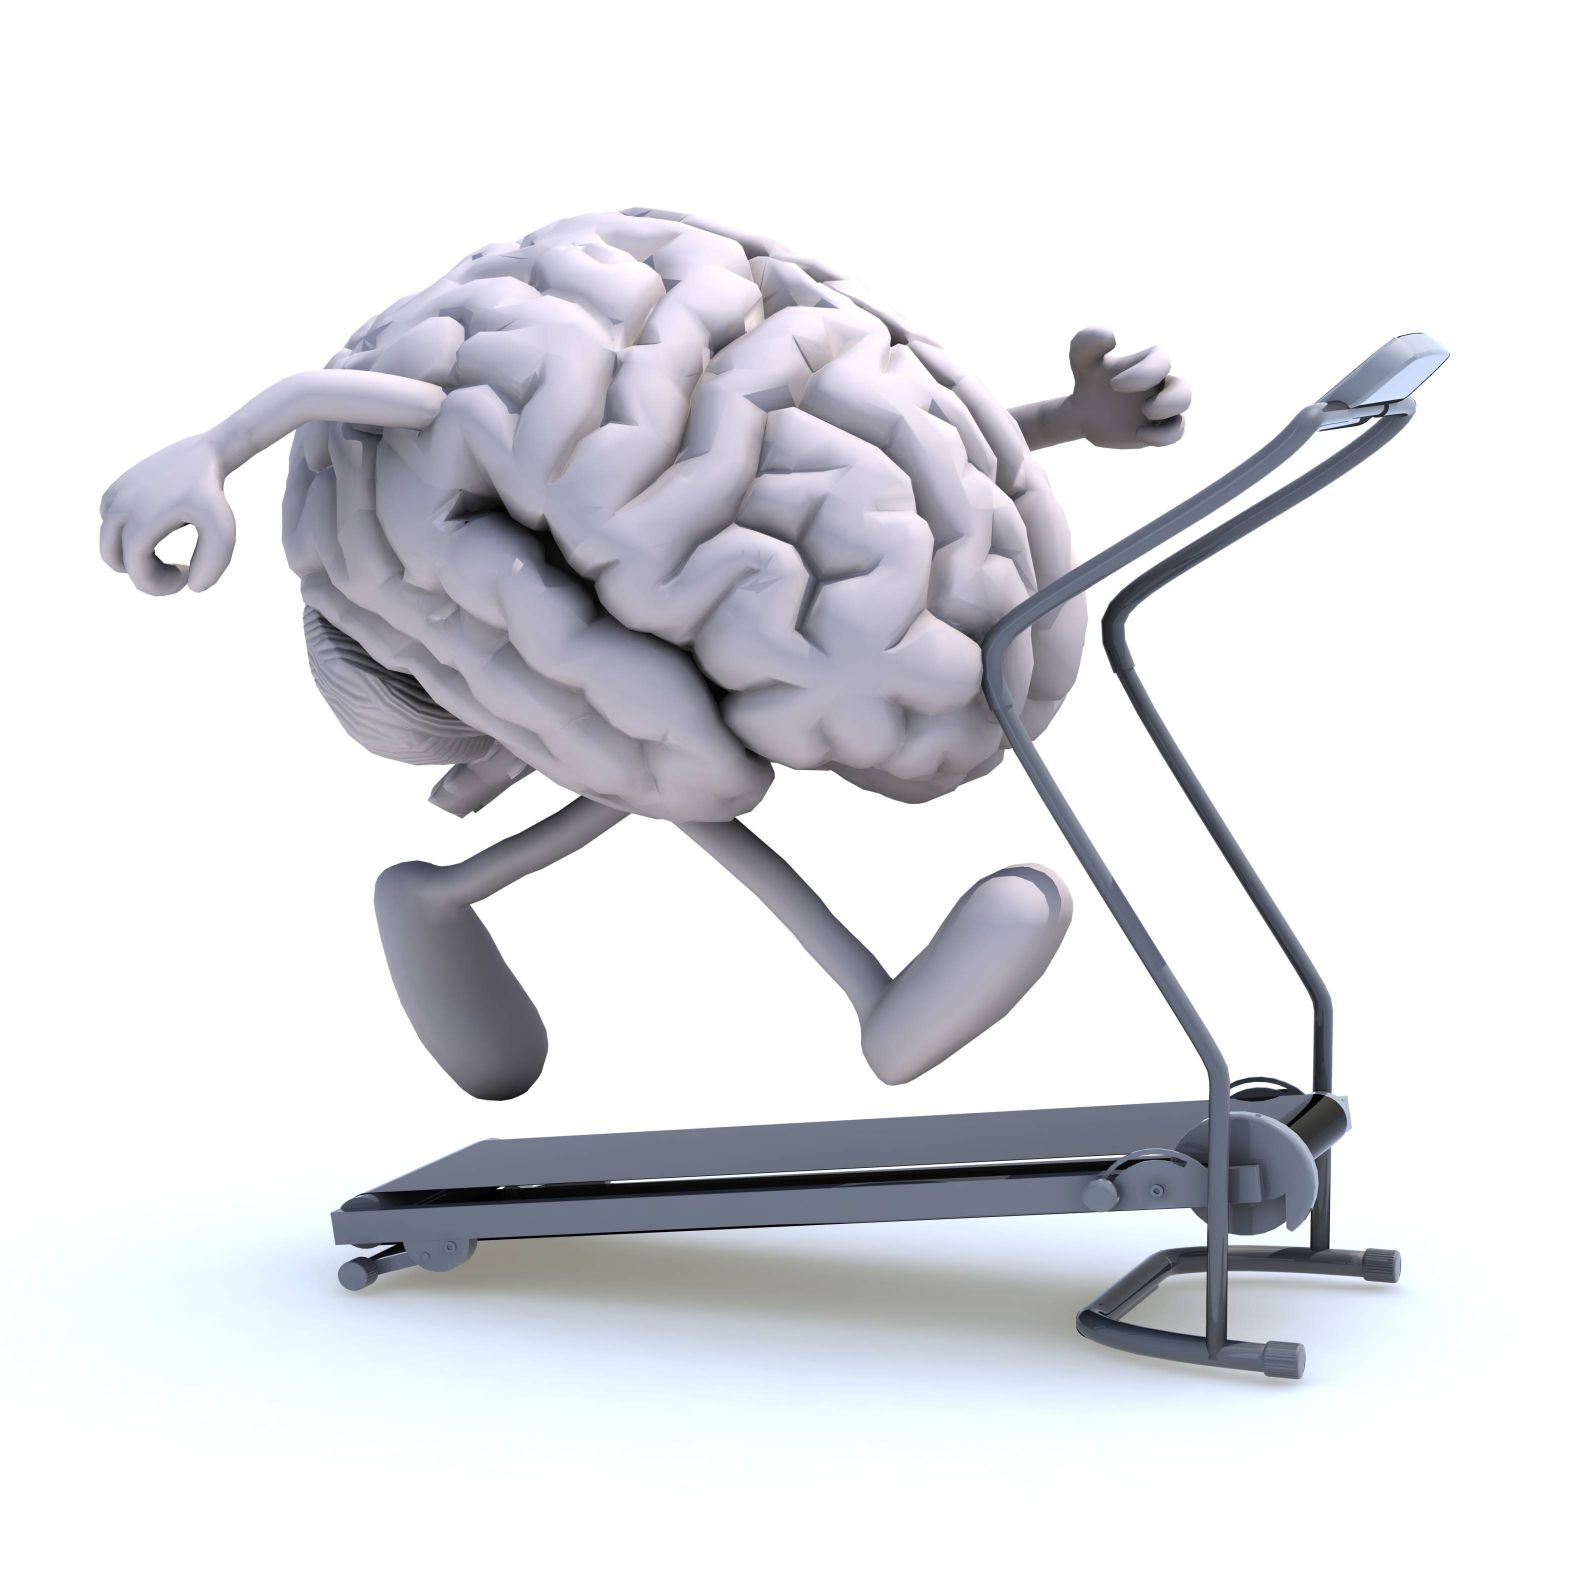 A brain running on a treadmill, which perhaps represents the online sites that claim brain exercises benefit the users.